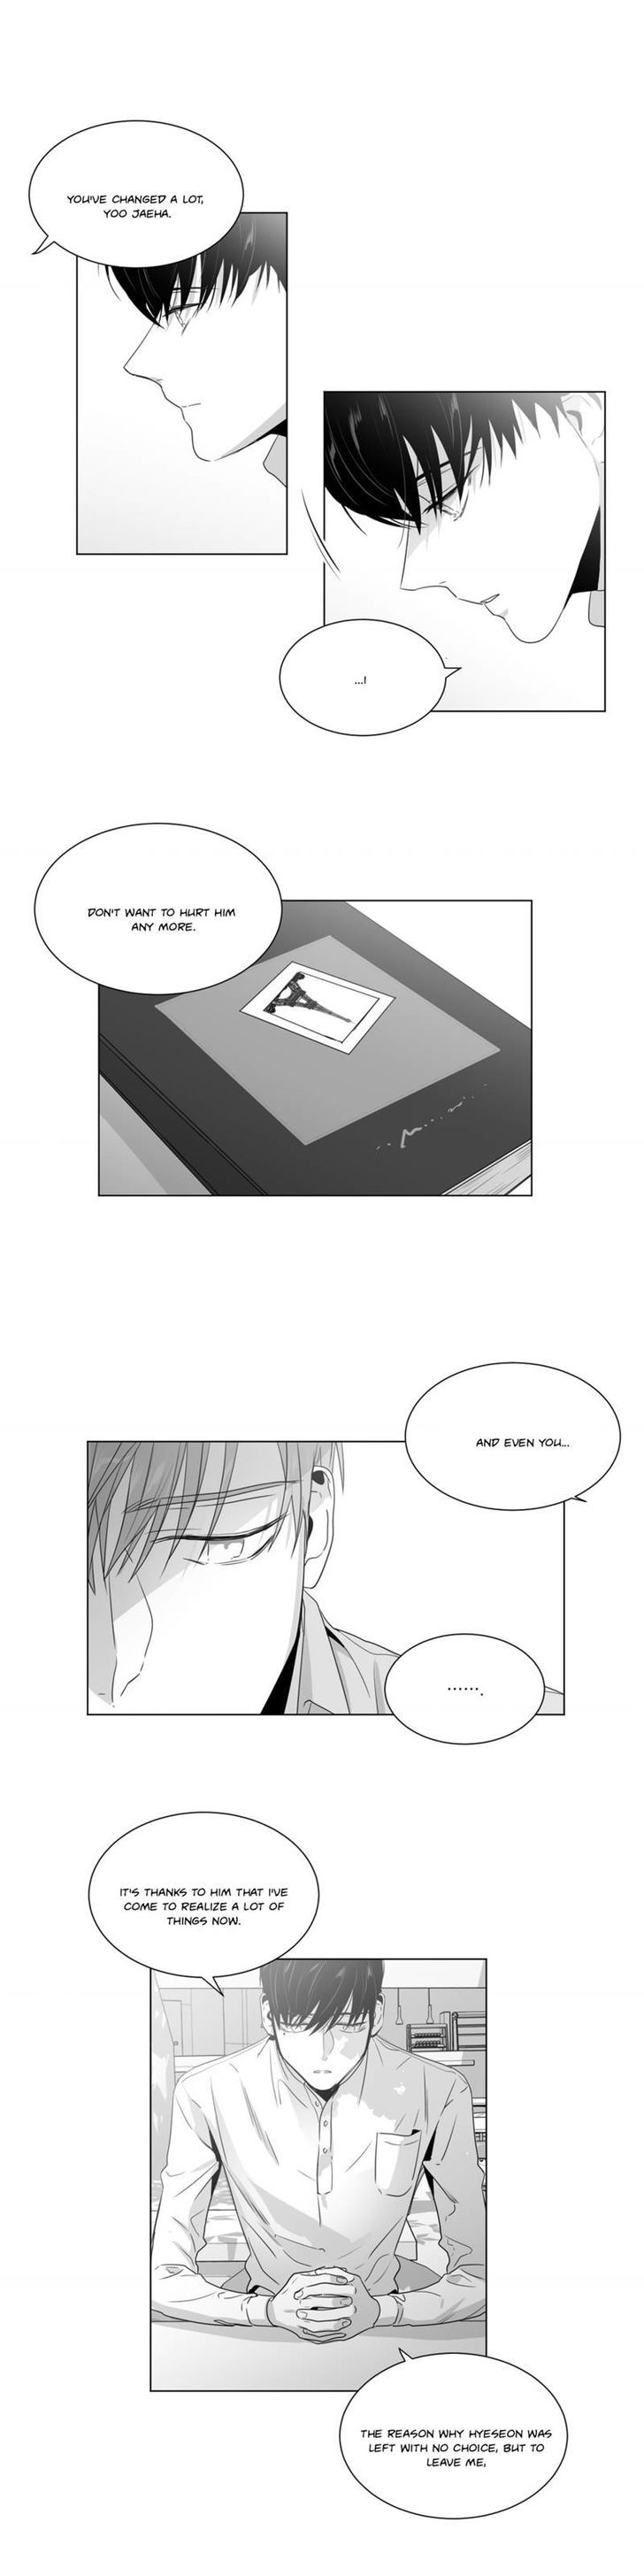 Lover Boy (Lezhin) Chapter 037 page 8